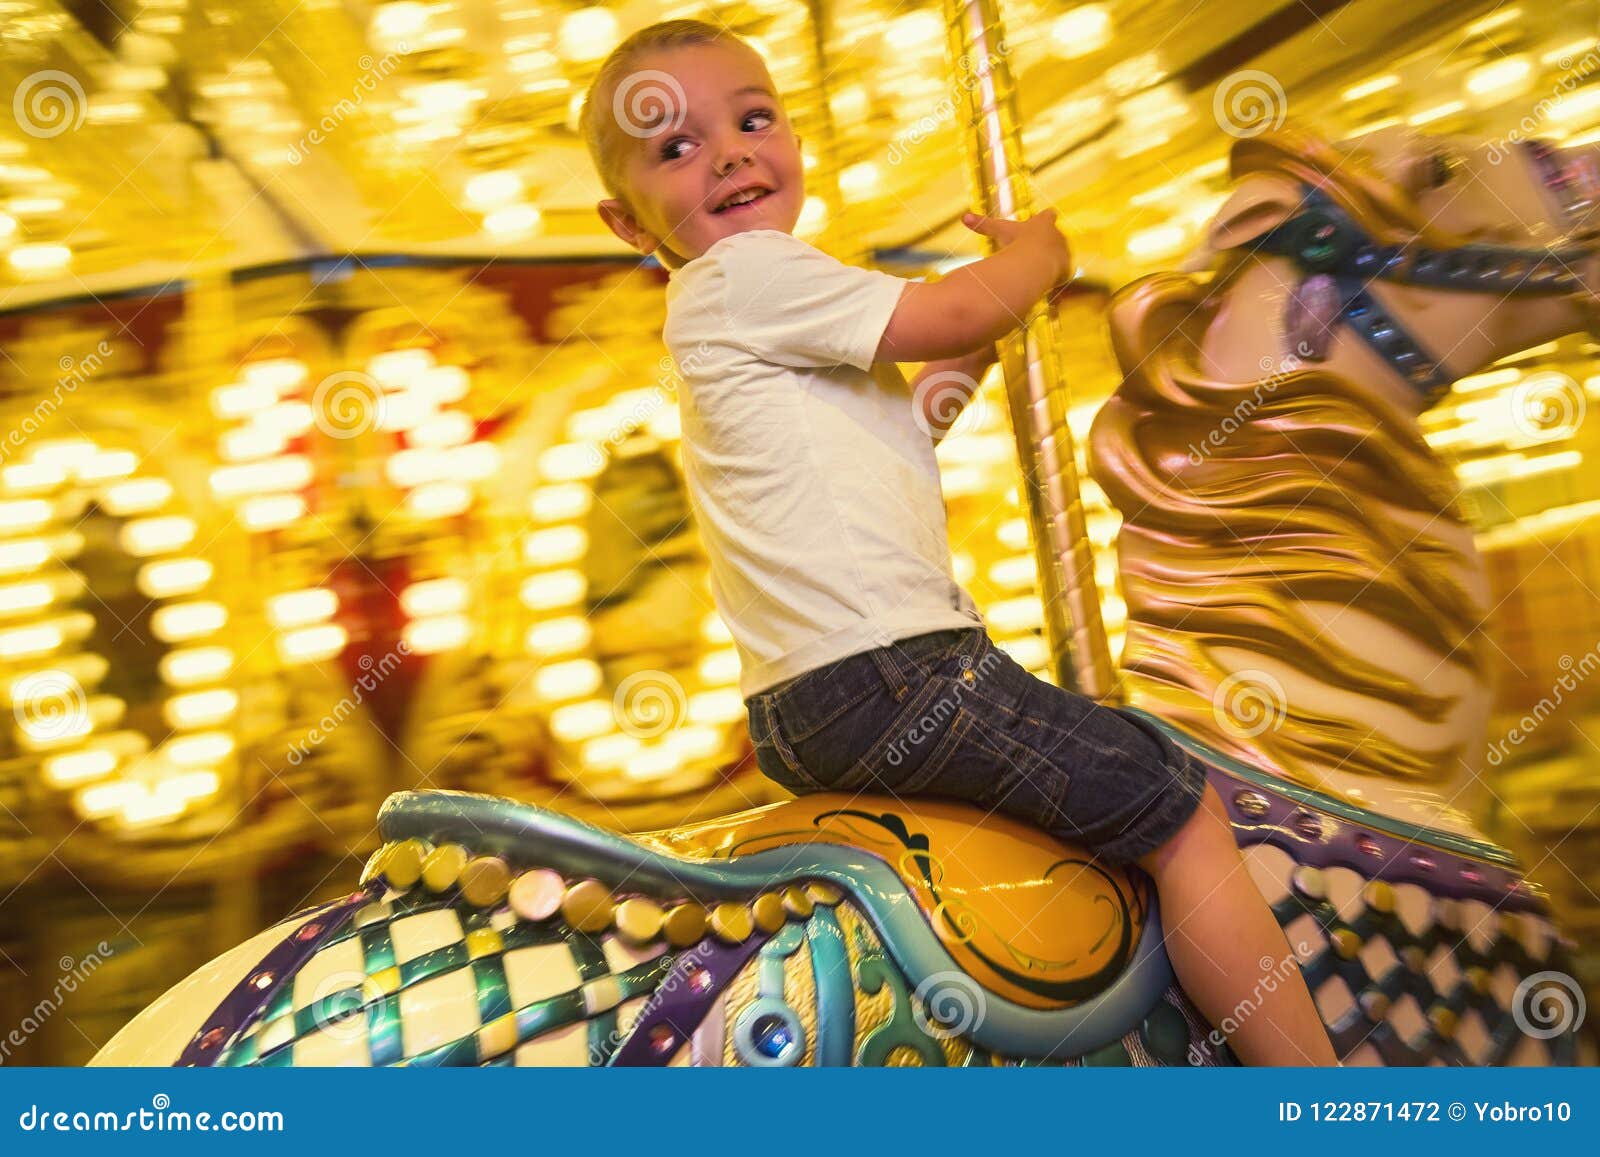 Happy Little Boy Riding A Merry Go Round Carousel With Bright Lights